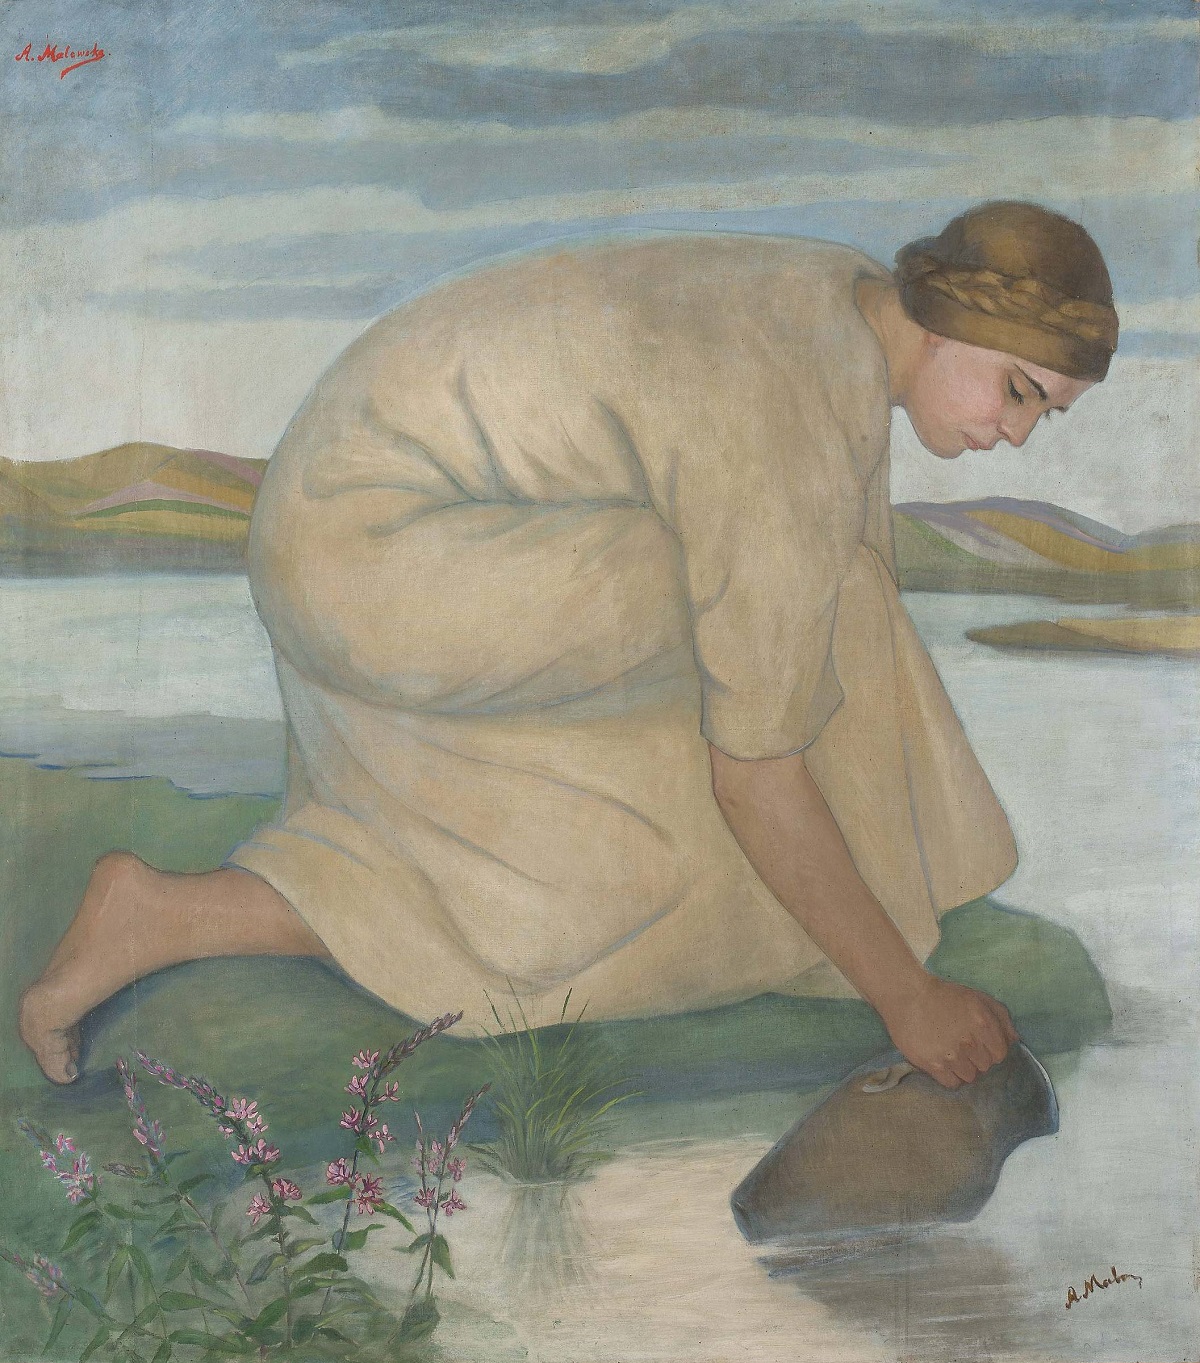 Girl Drawing Water by the Jug